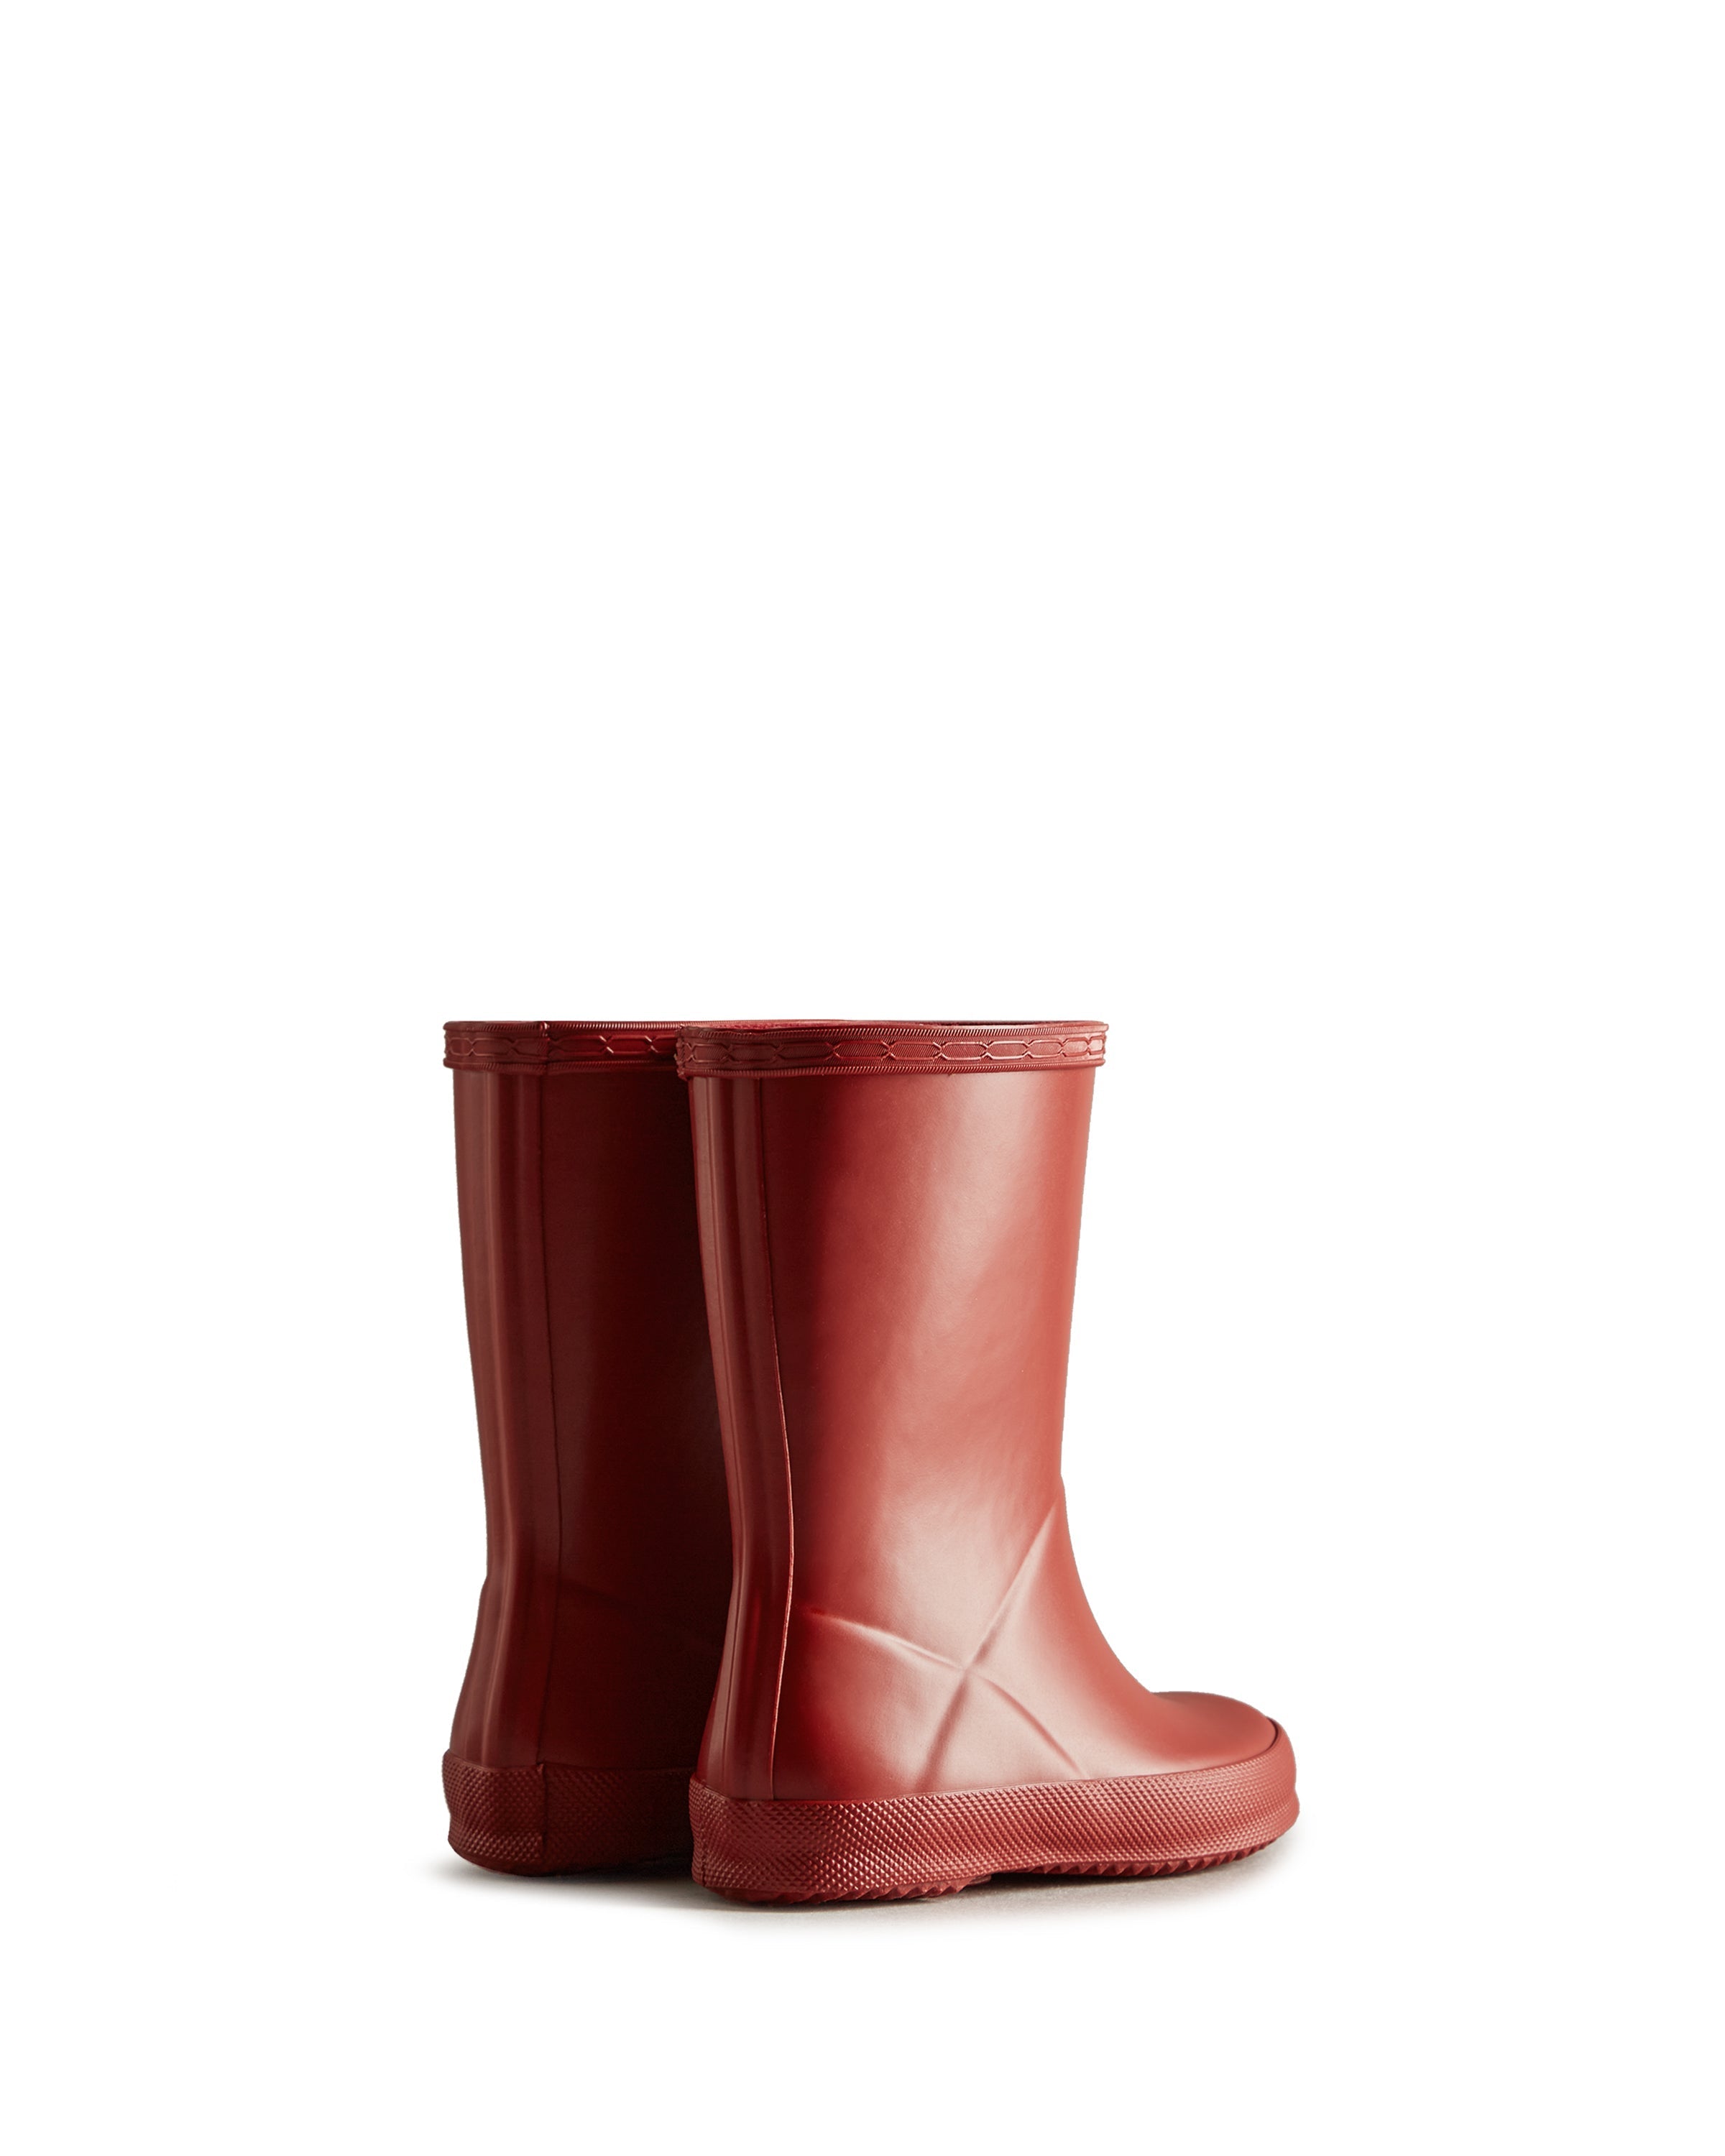 Original Kids First Classic Boots - Military Red